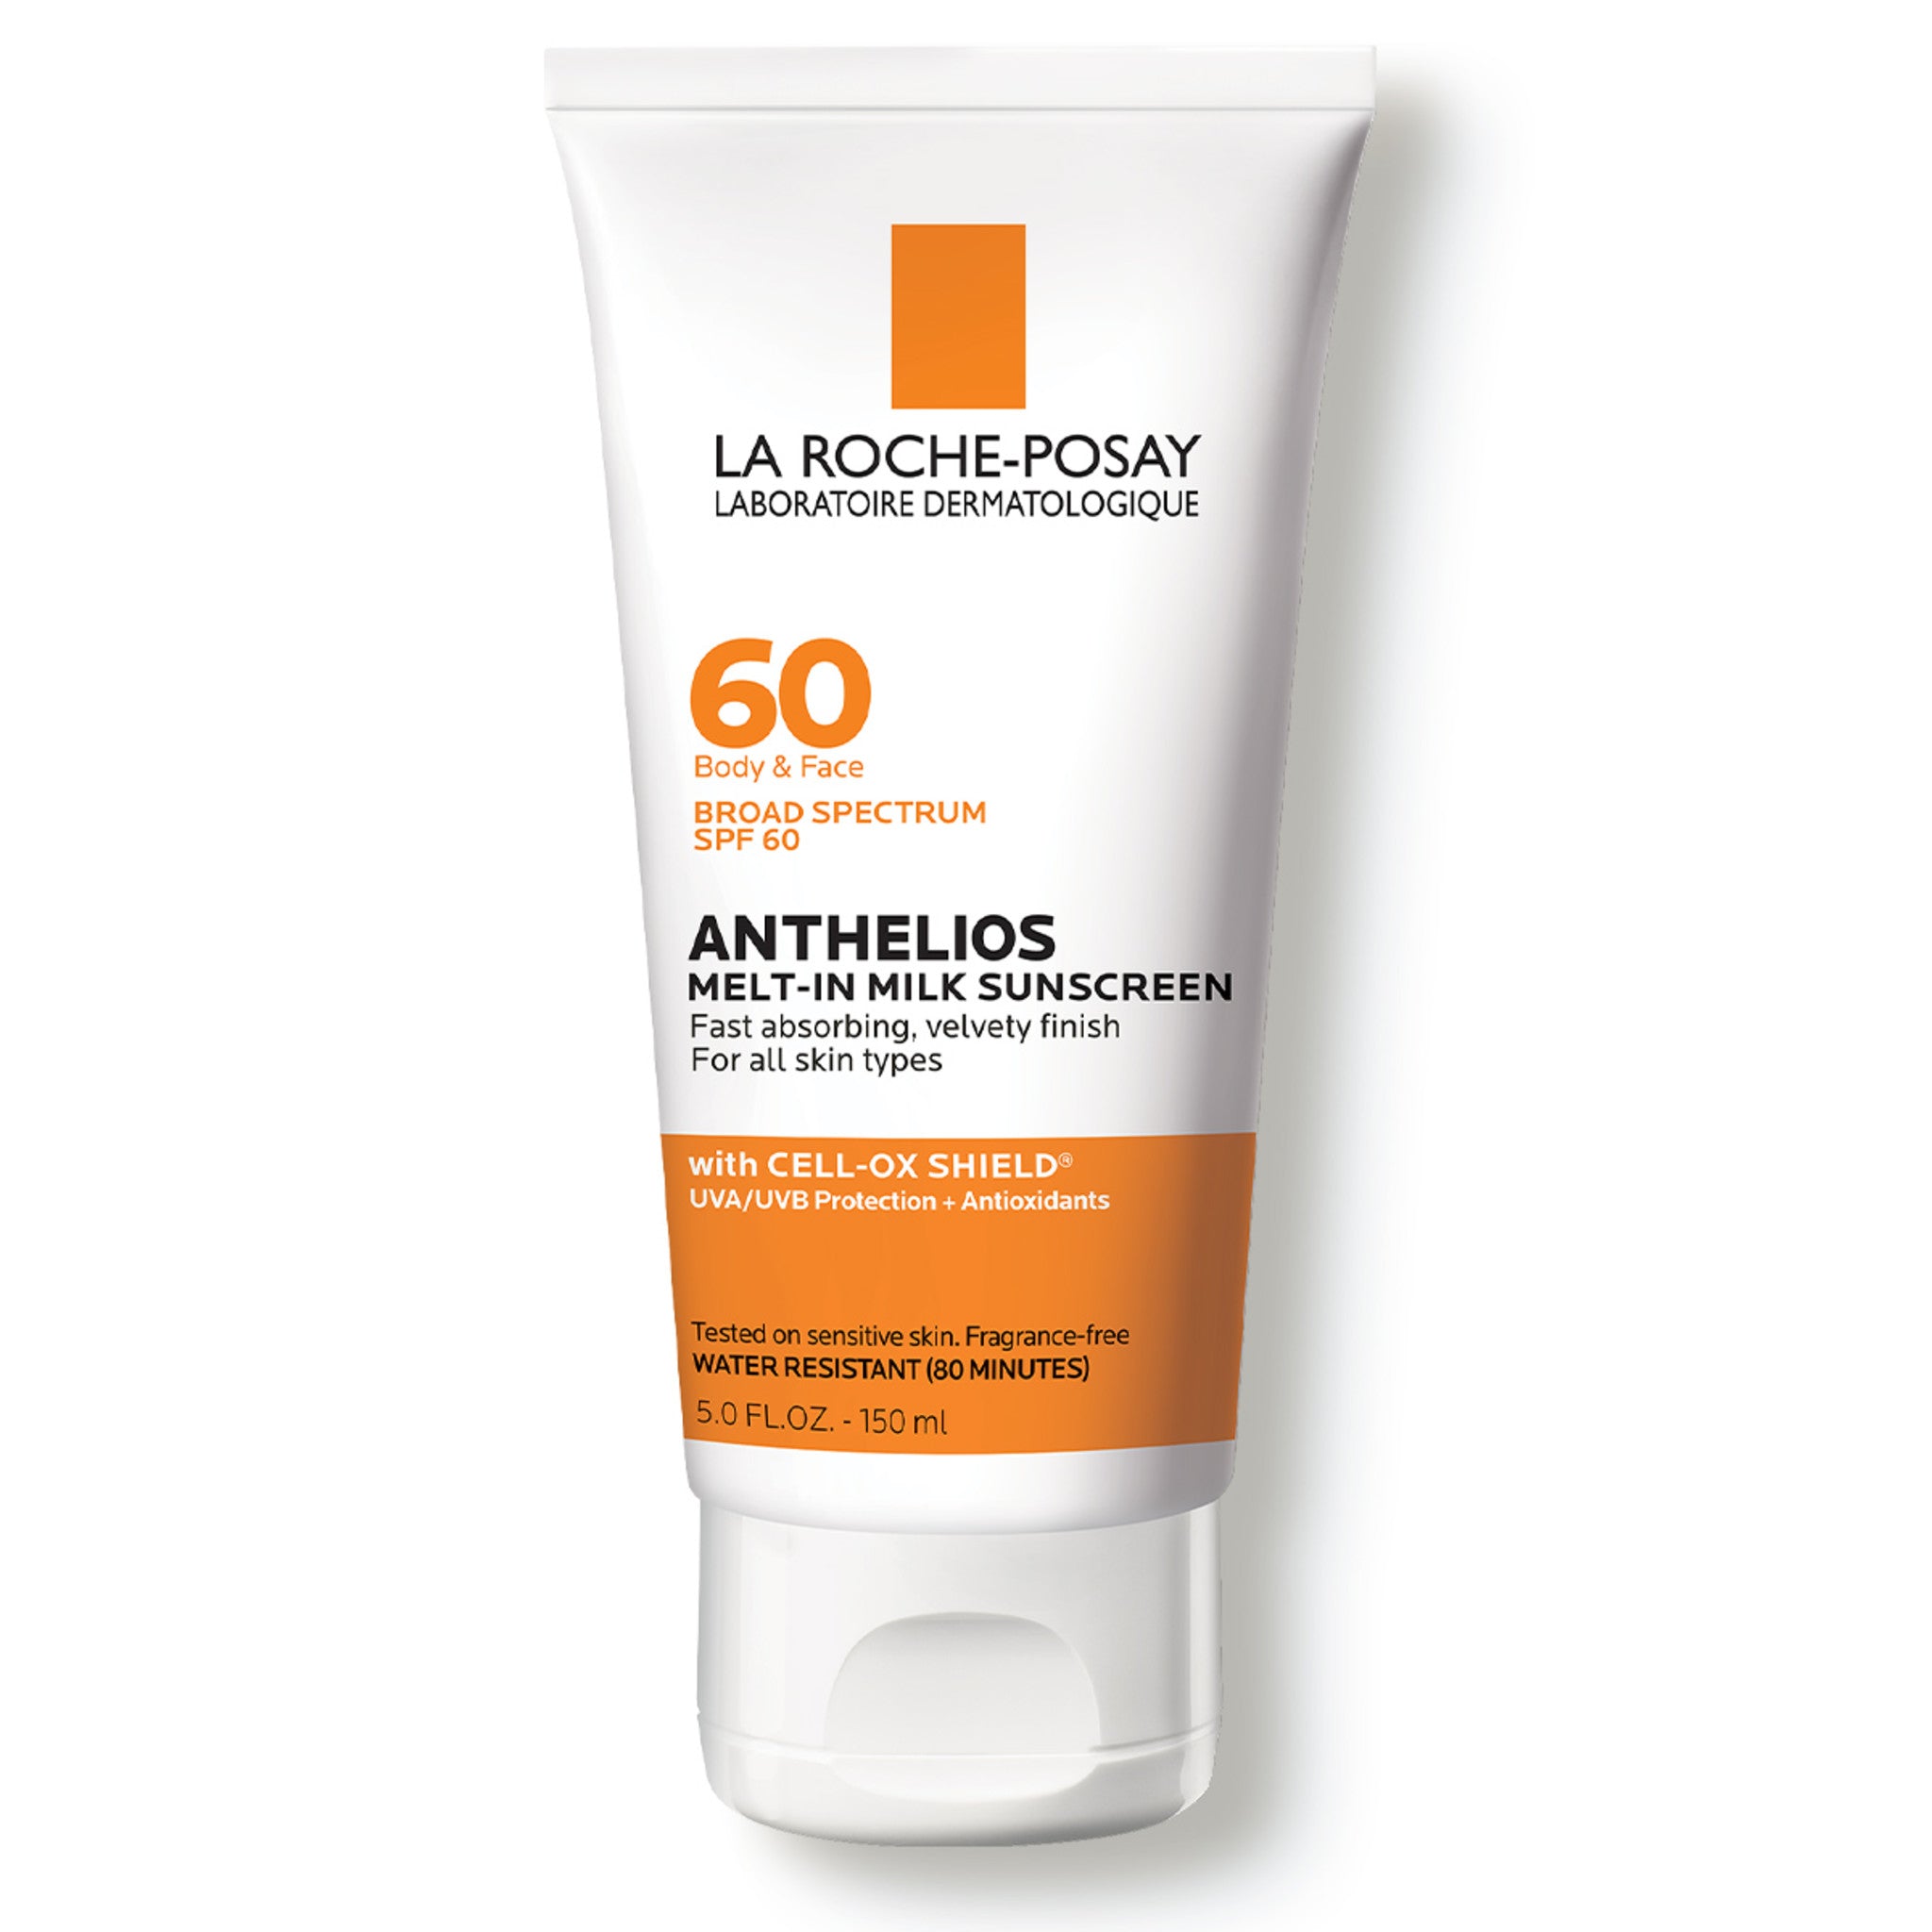 La Roche-Posay Anthelios Melt-In Milk Sunscreen Lotion SPF 60 main image.